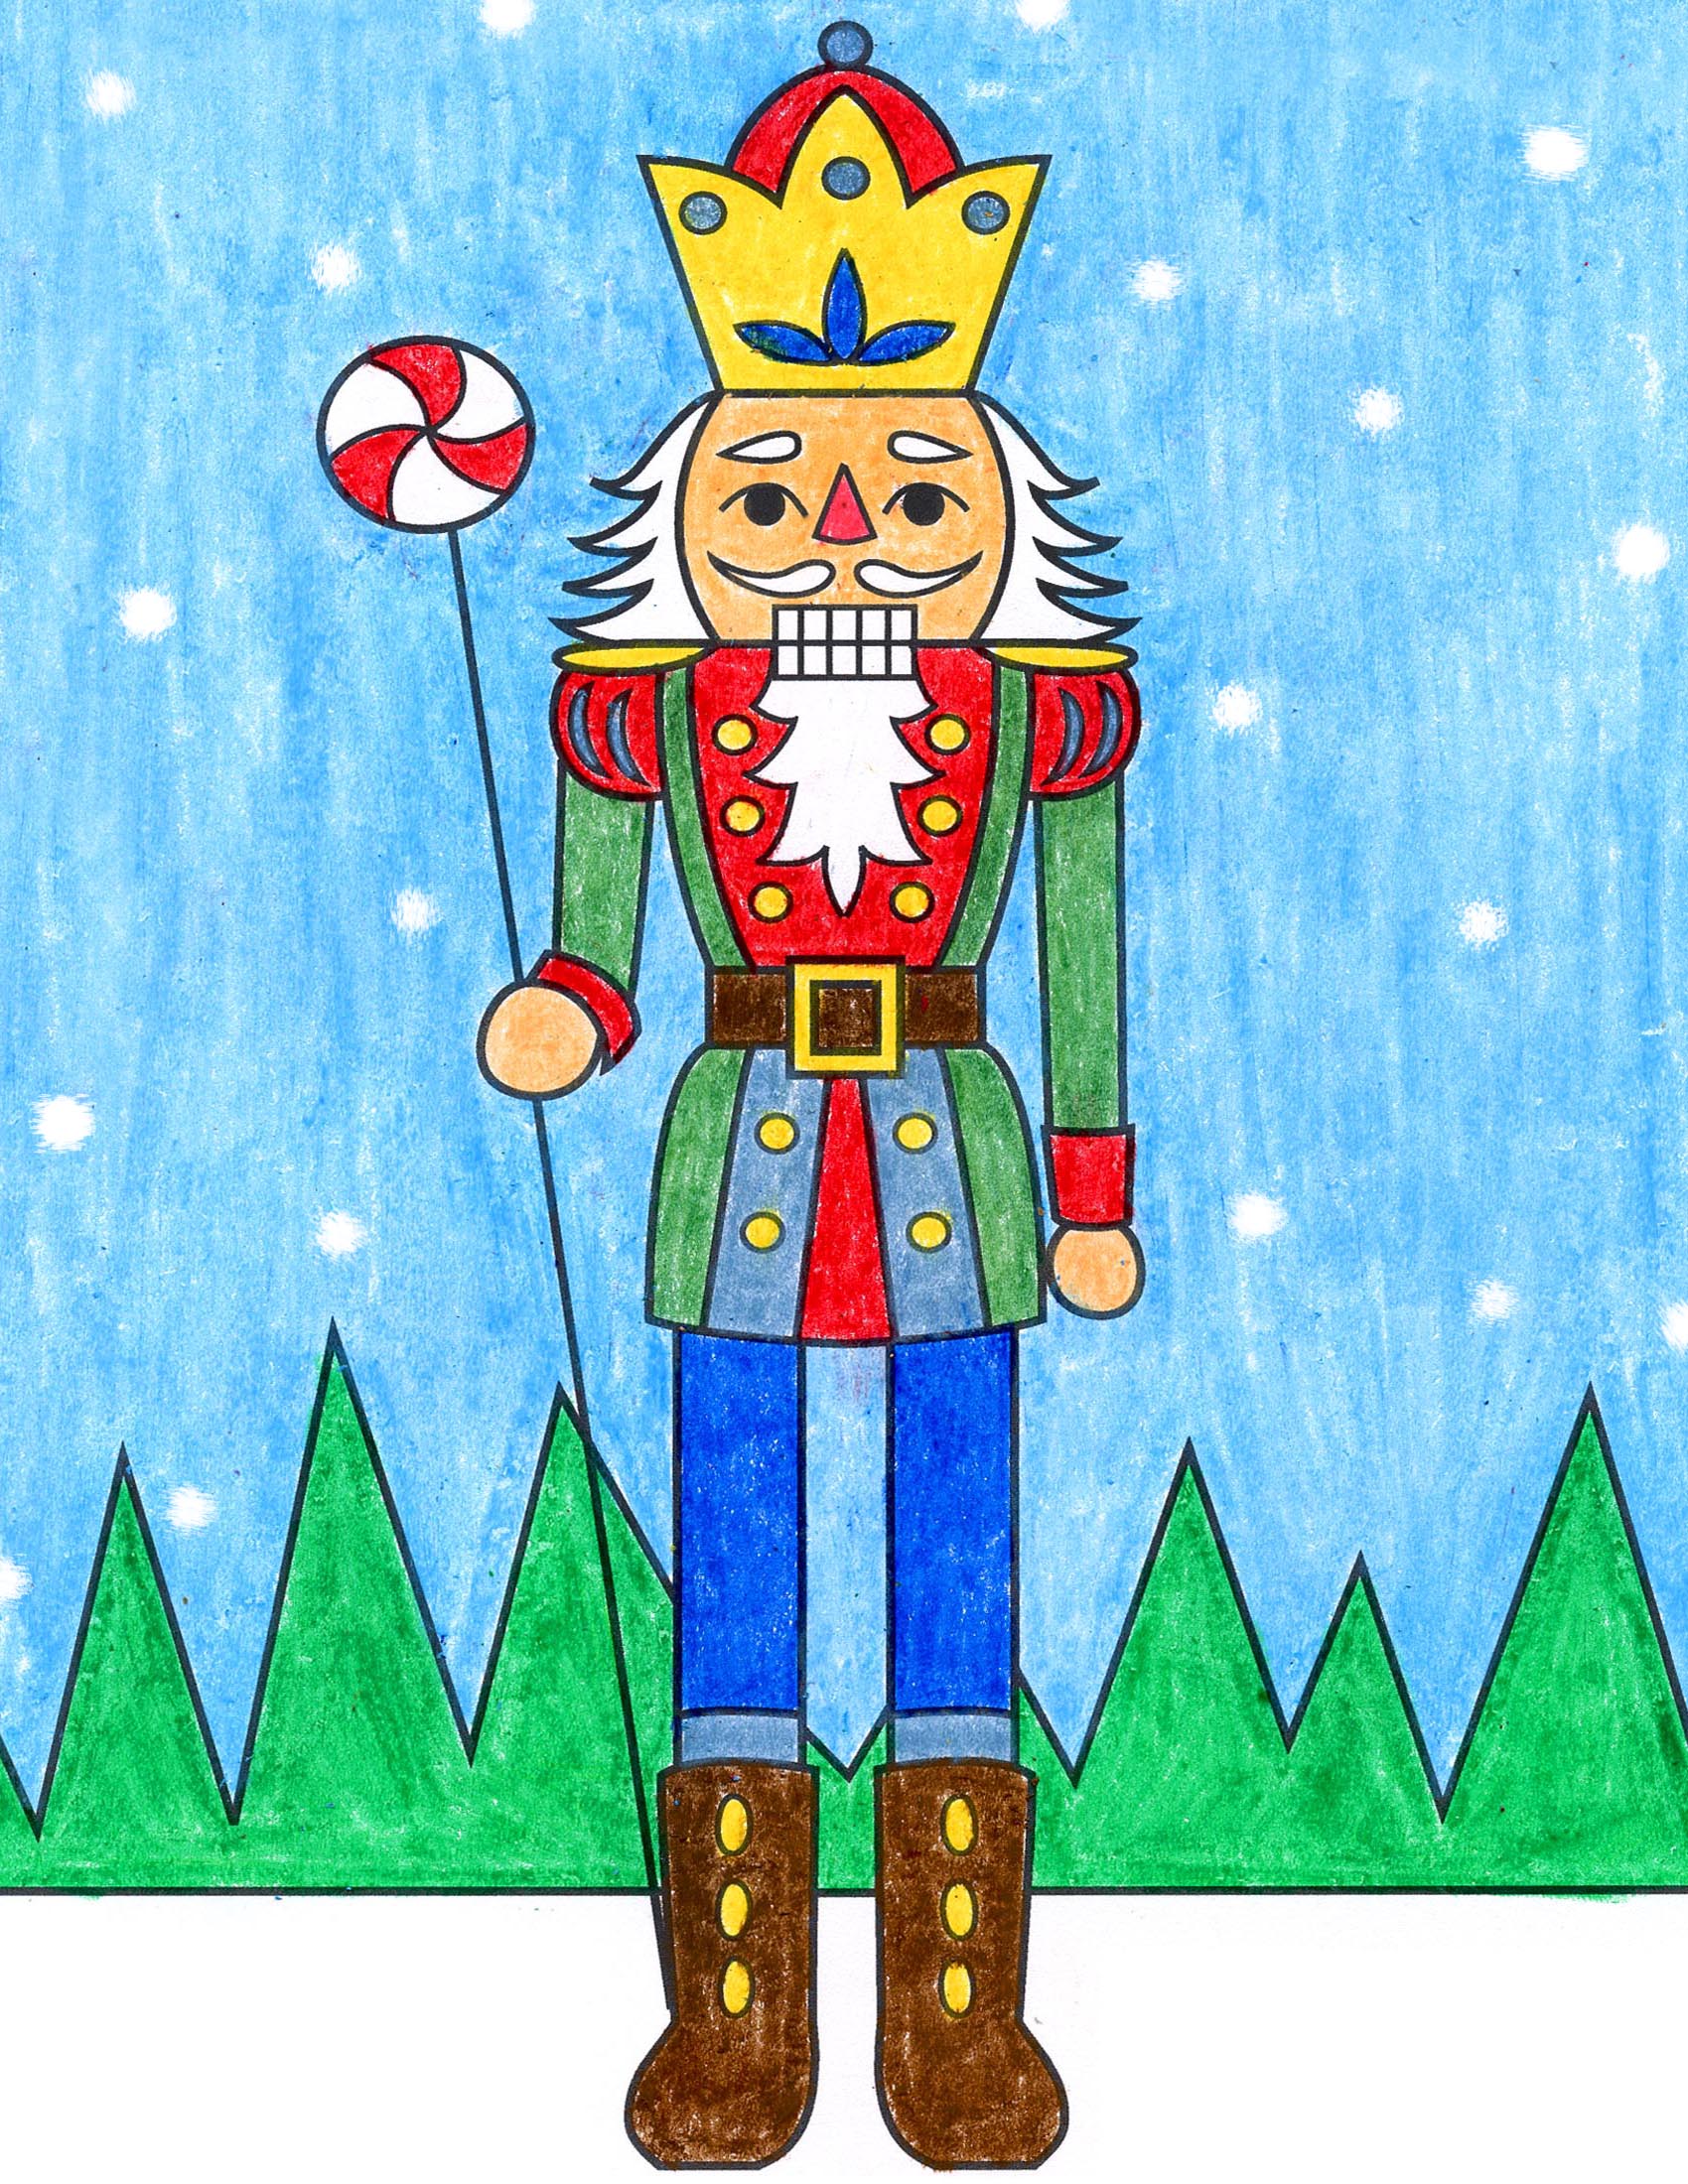 Easy How to Draw a Nutcracker Tutorial and Nutcracker Coloring Page